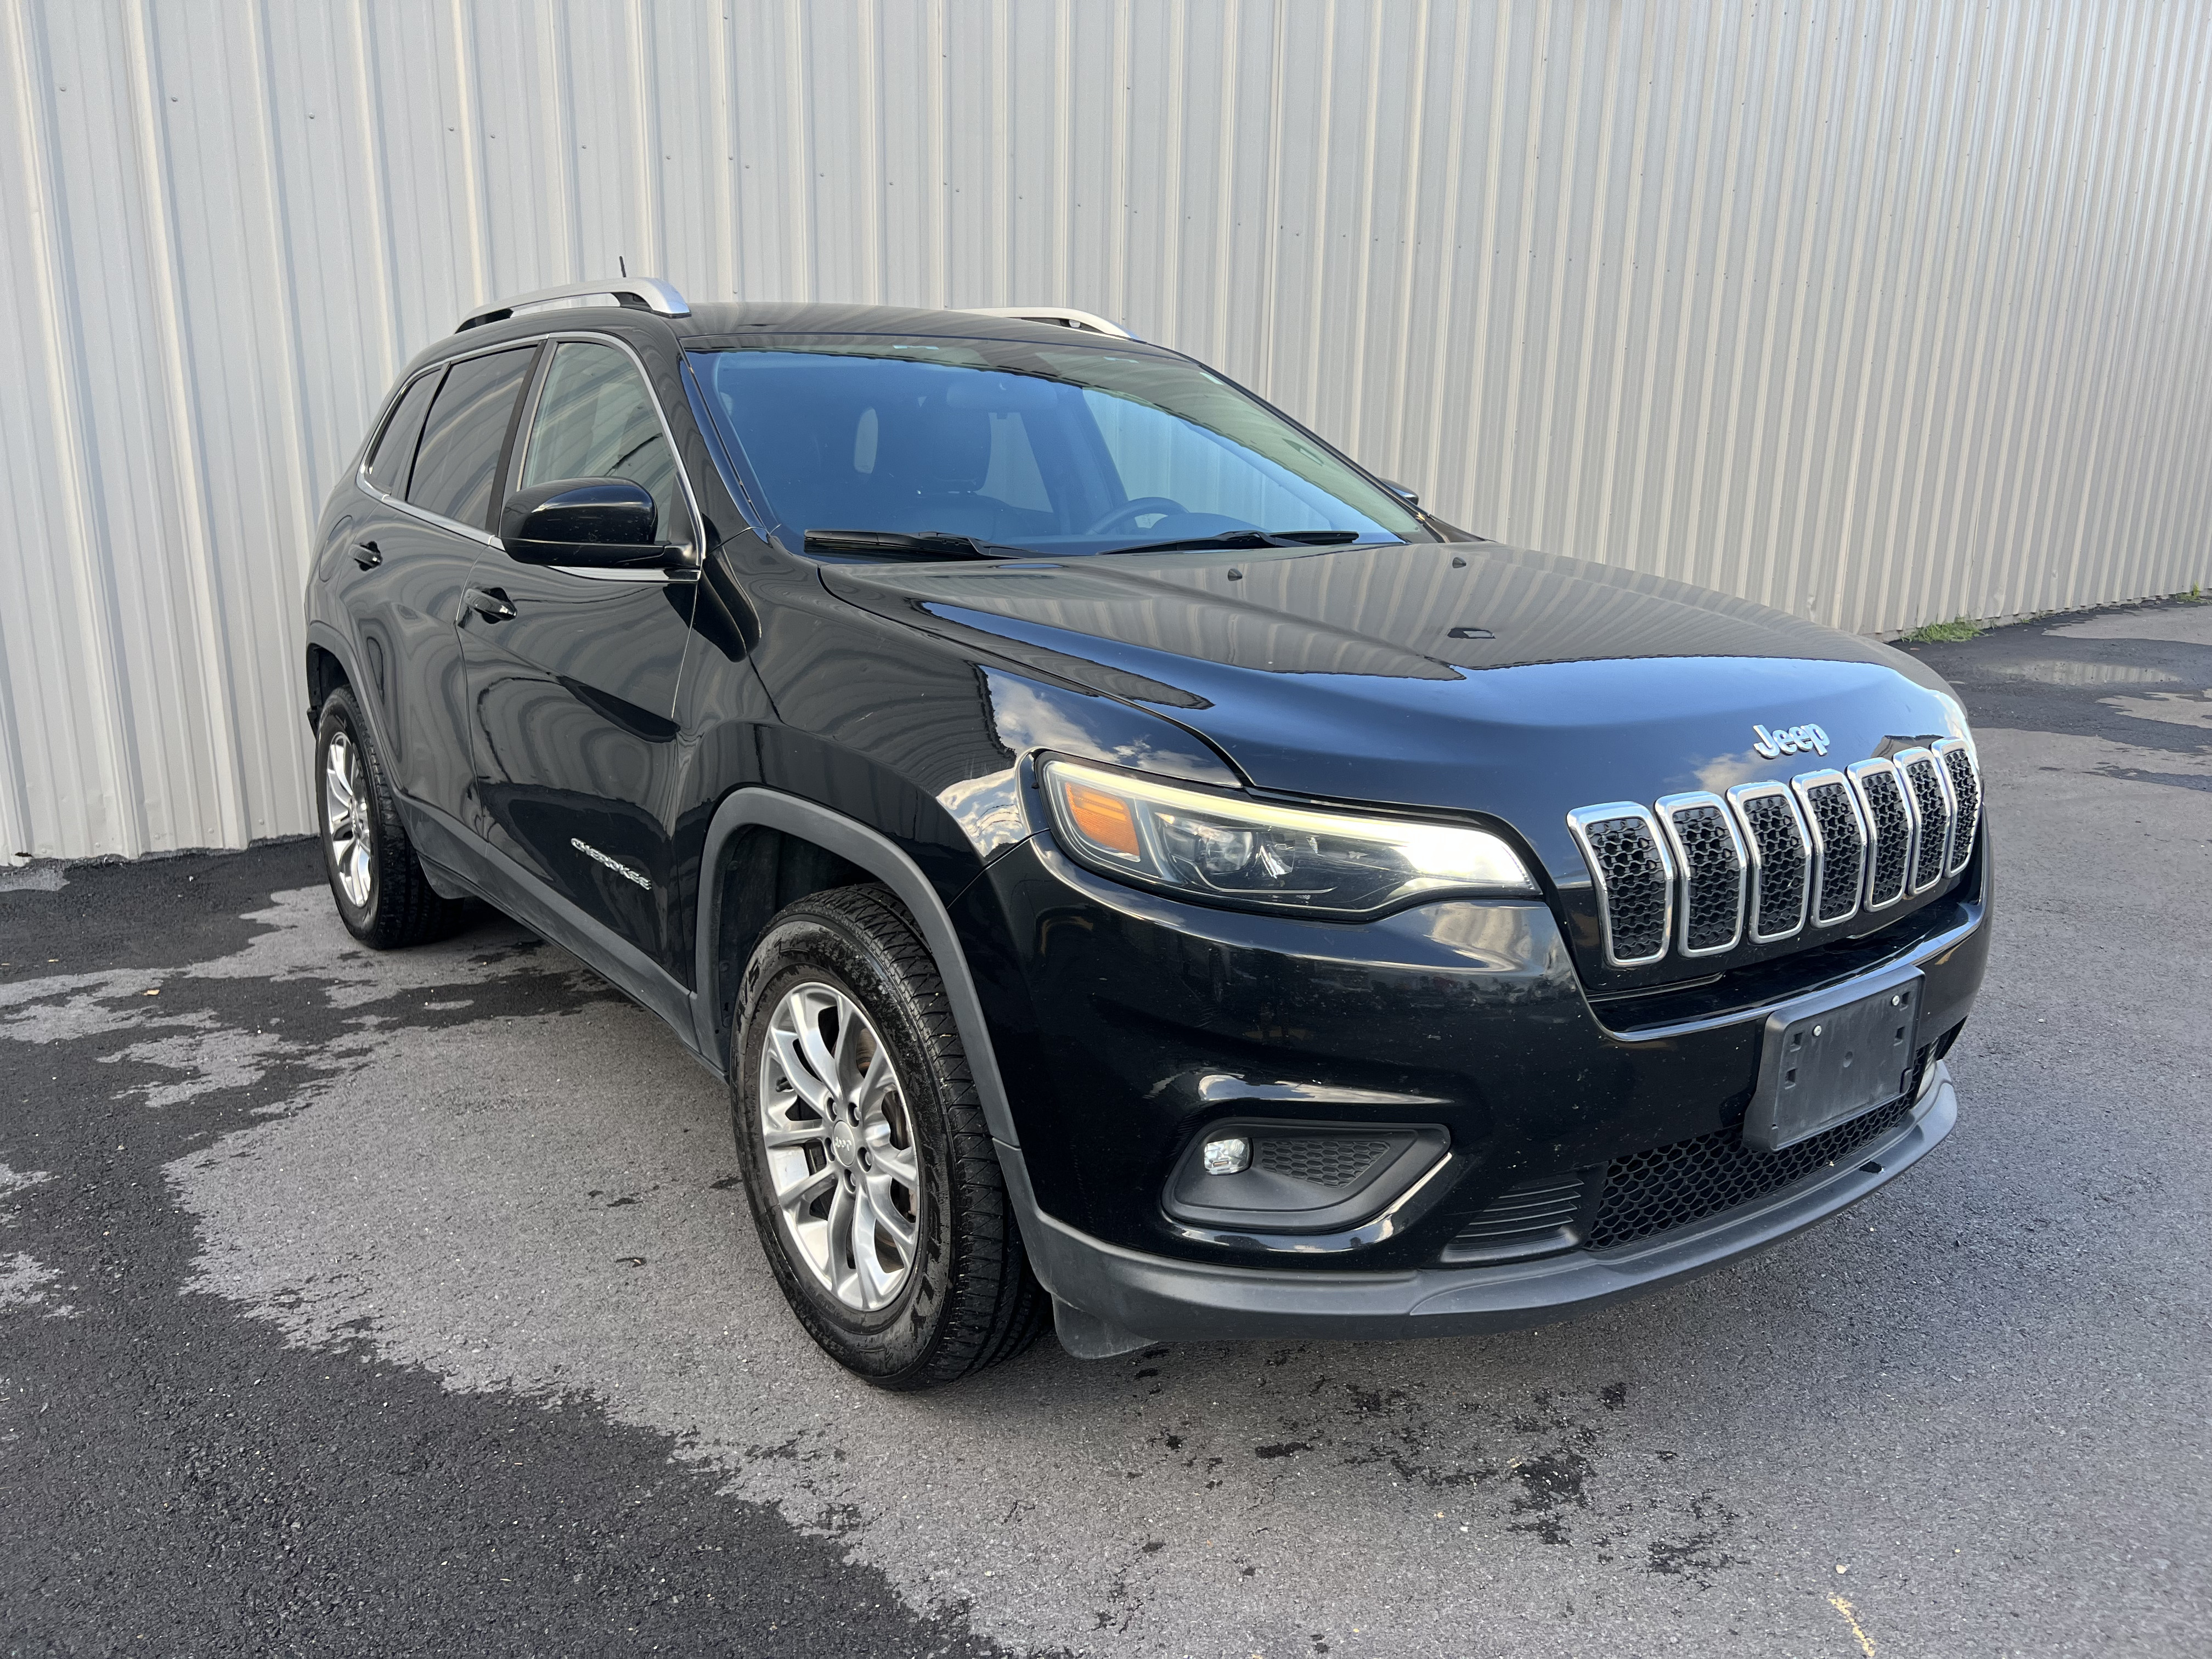 Used Jeep for sale in Houston TX.  We Finance! 